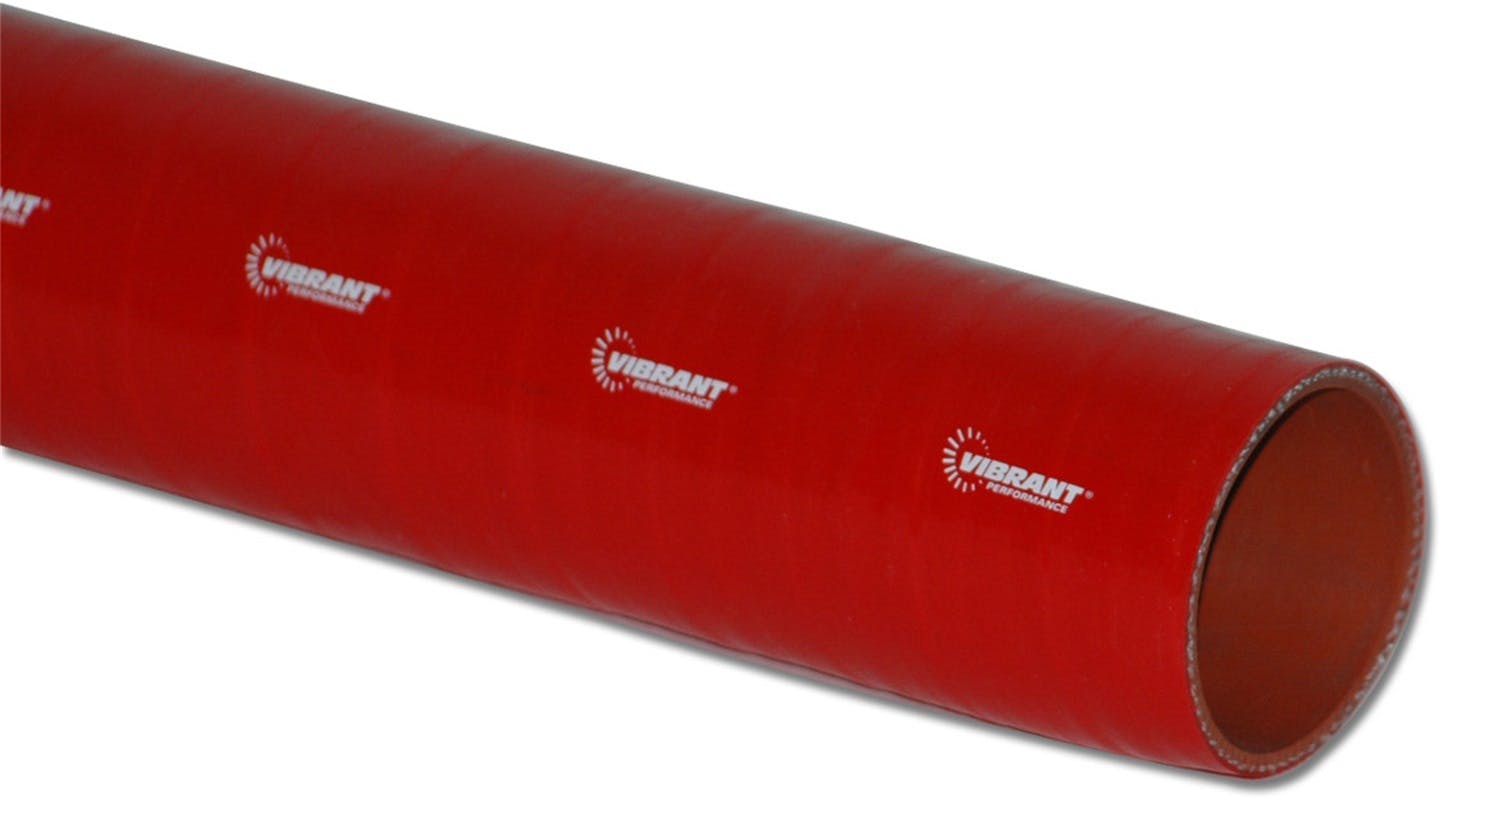 Vibrant Performance 27111R 4 Ply Silicone Sleeve, 2.5 inch I.D. x 12 inch Long - Red